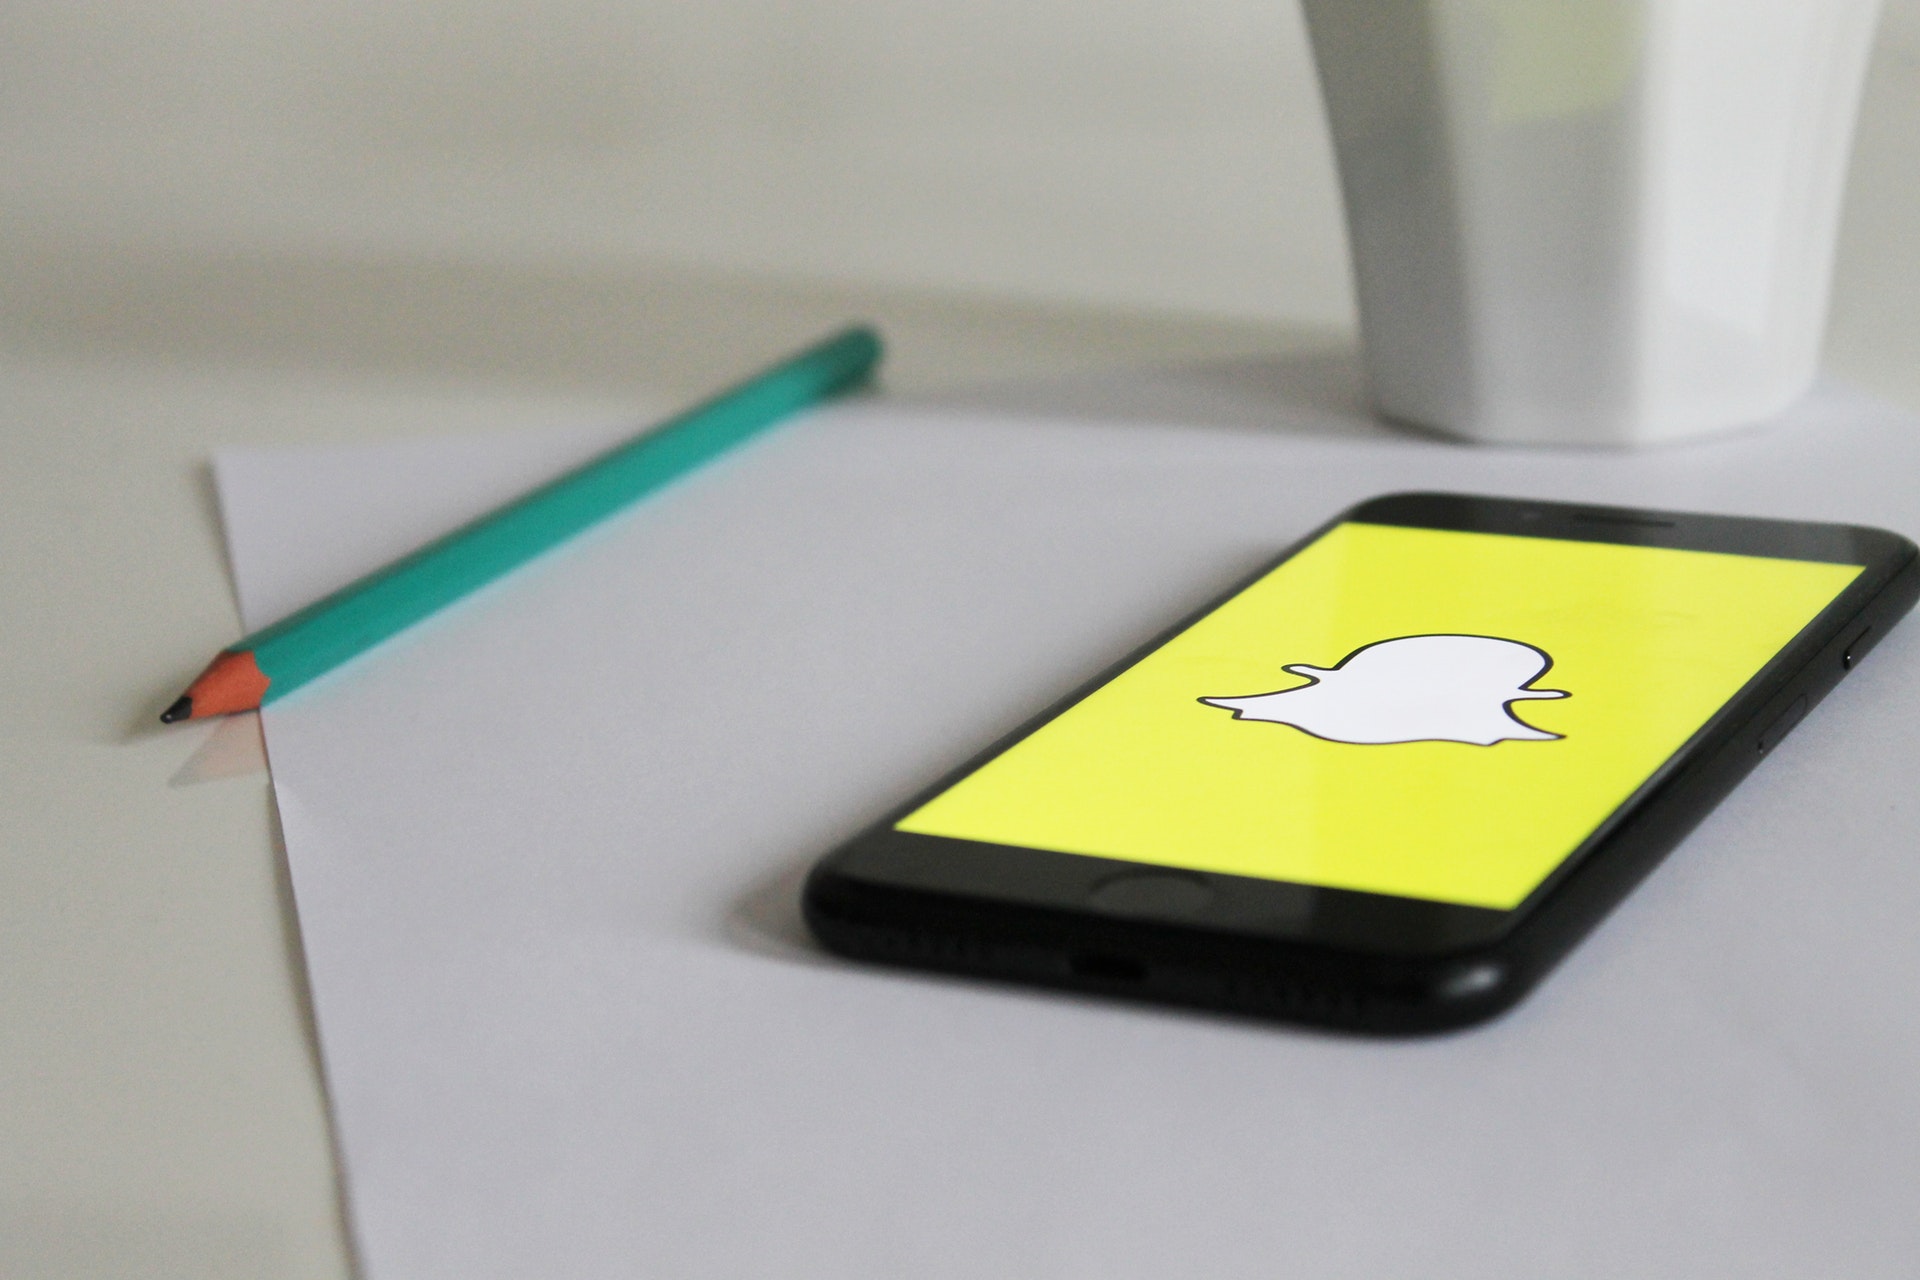 Snapchat stuggles as the number of active users dwindle